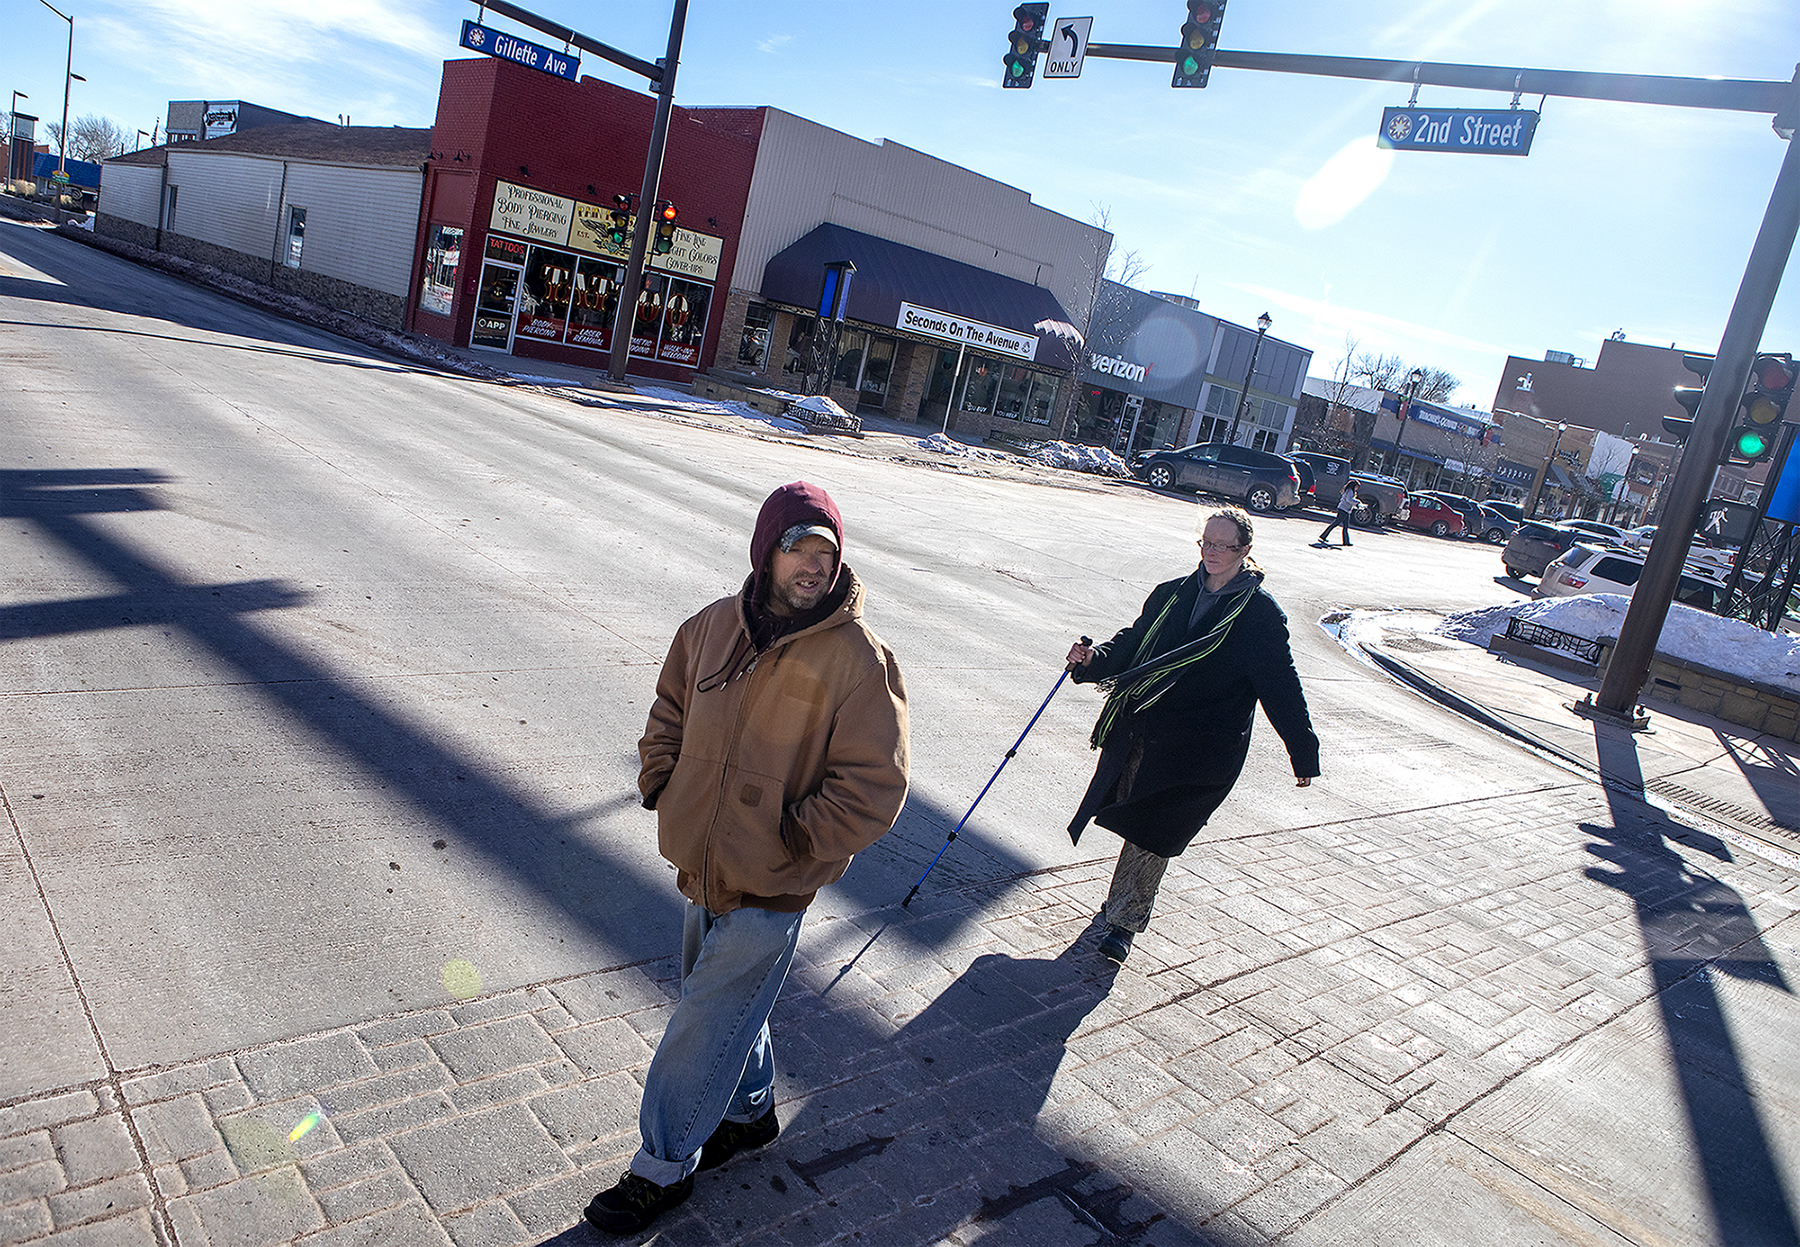  Andrea and Jeff cross second street on their walk to the Gillette Soup Kitchen on Wednesday, Jan. 30, 2019. Andre usually tries to avoid the main roads on their walks and stays vigilant of cars. They have seen a number of people, including two of Da